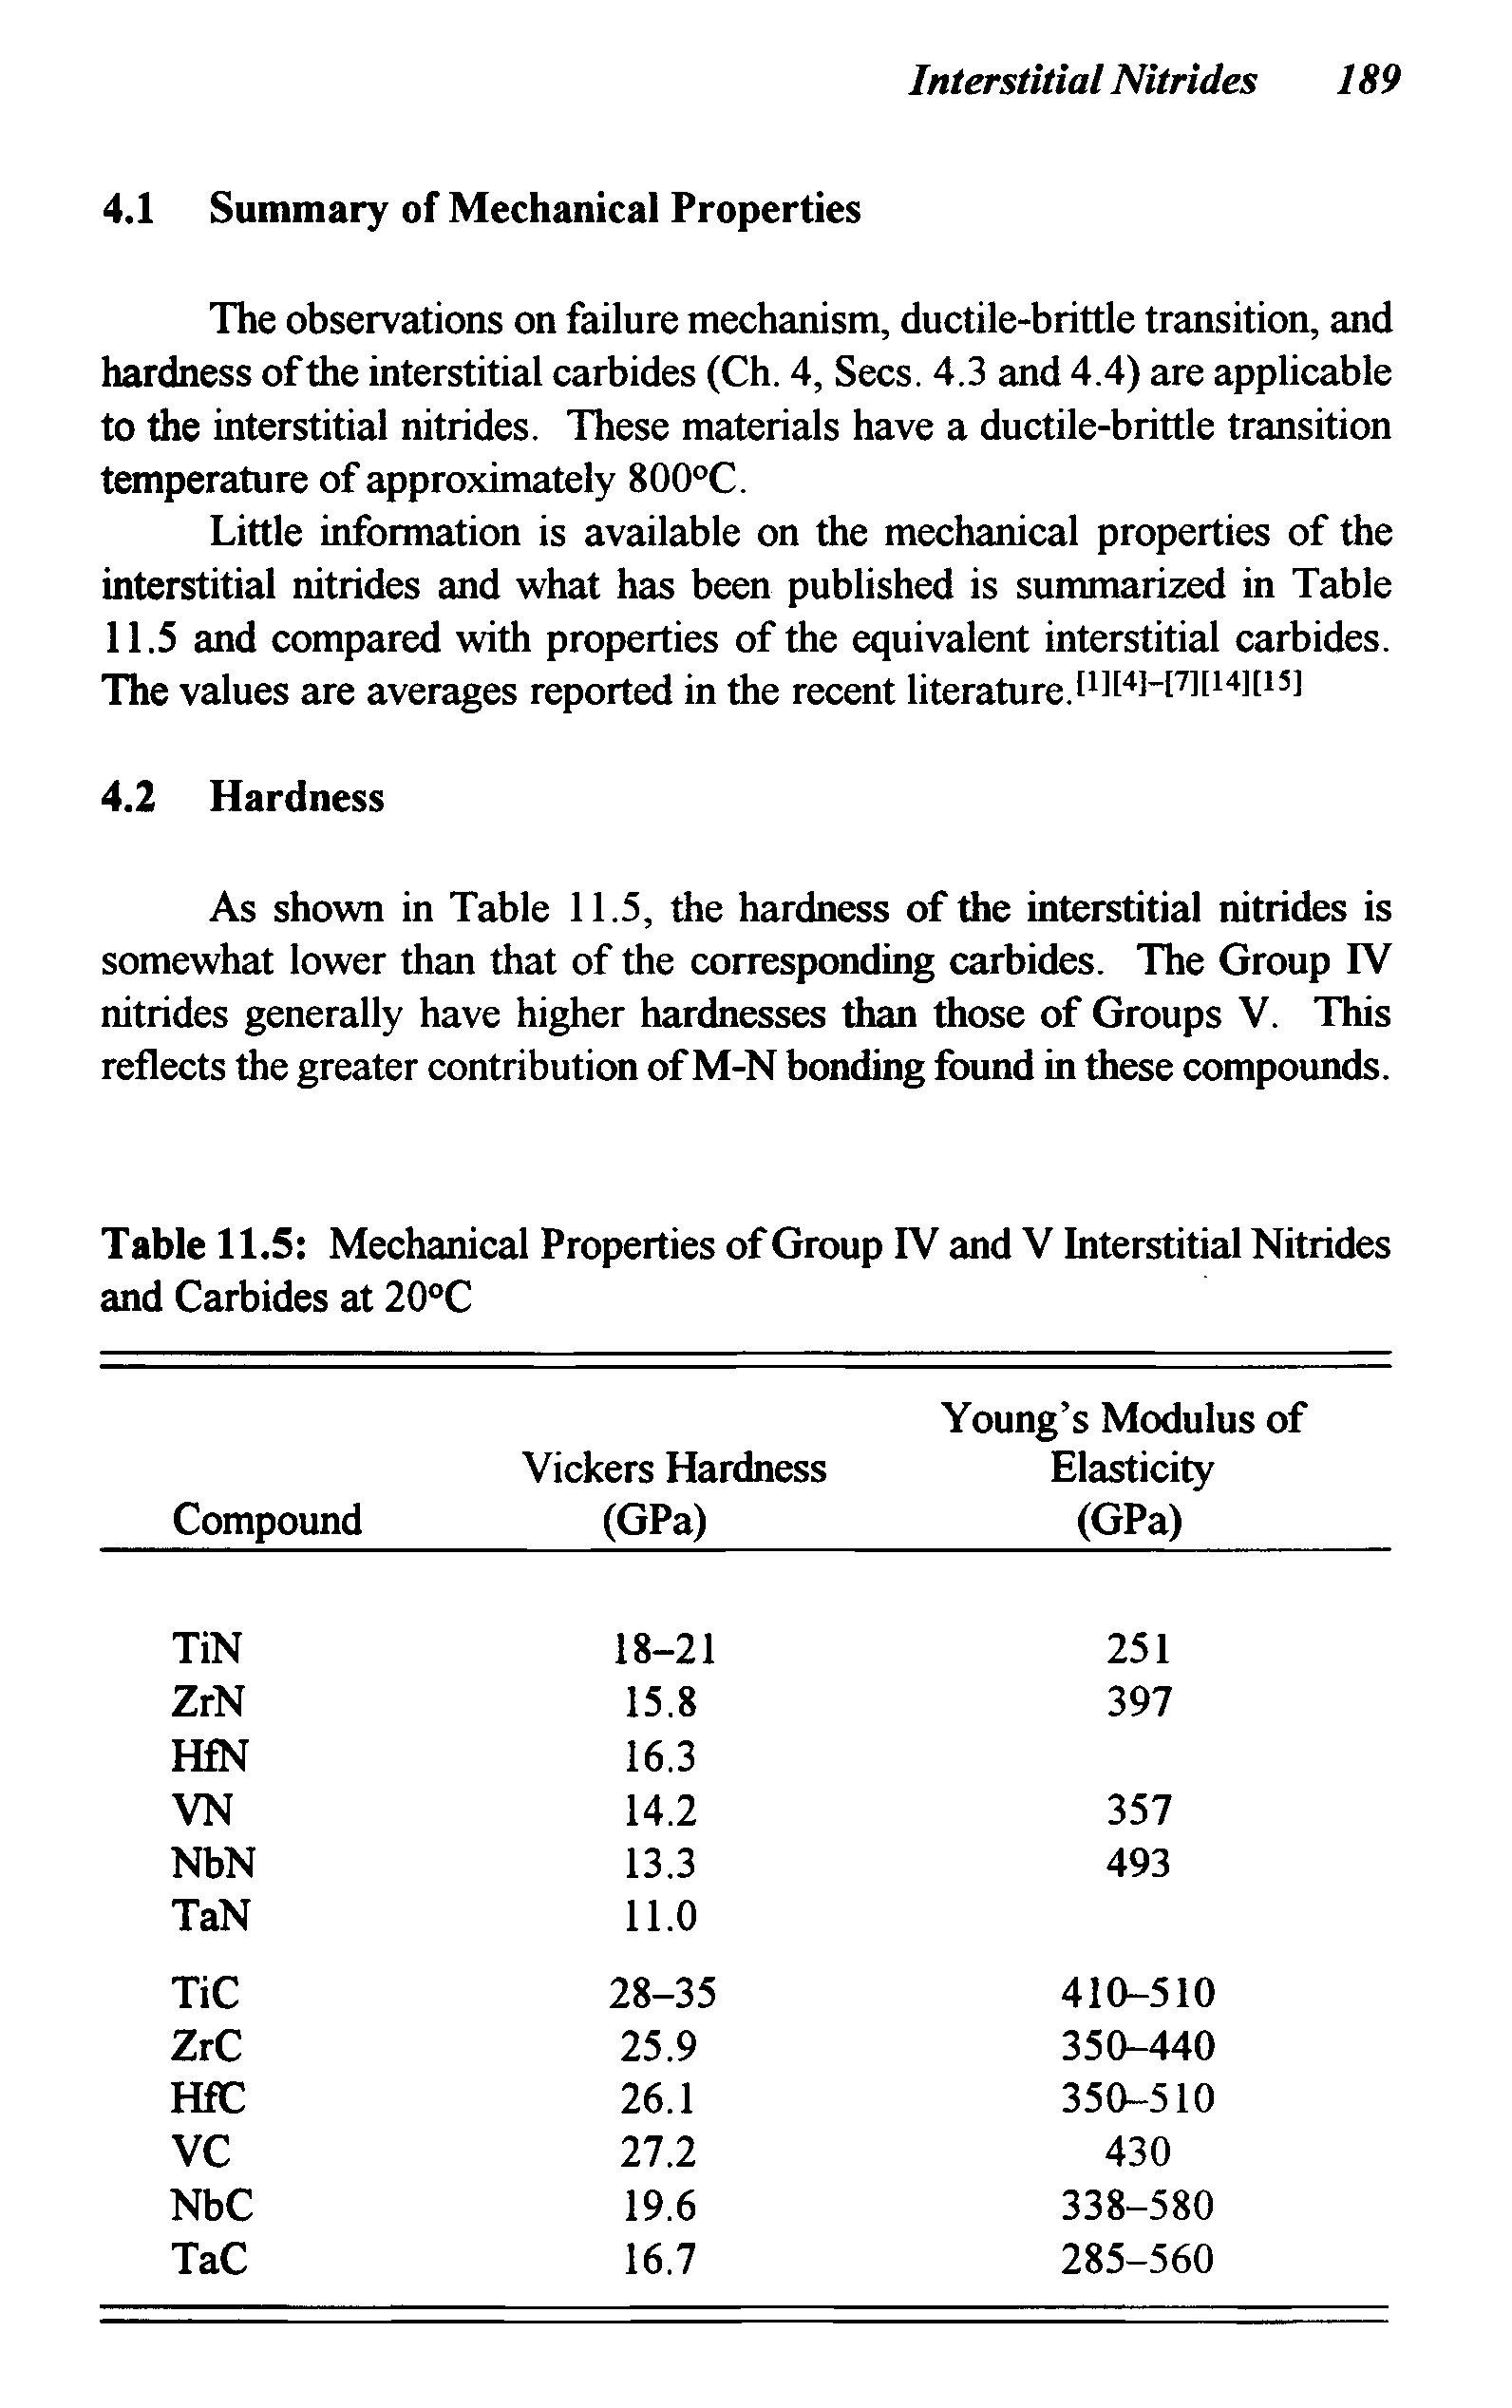 Table 11.5 Mechanical Properties of Group FV and V Interstitial Nitrides and Carbides at 20°C...